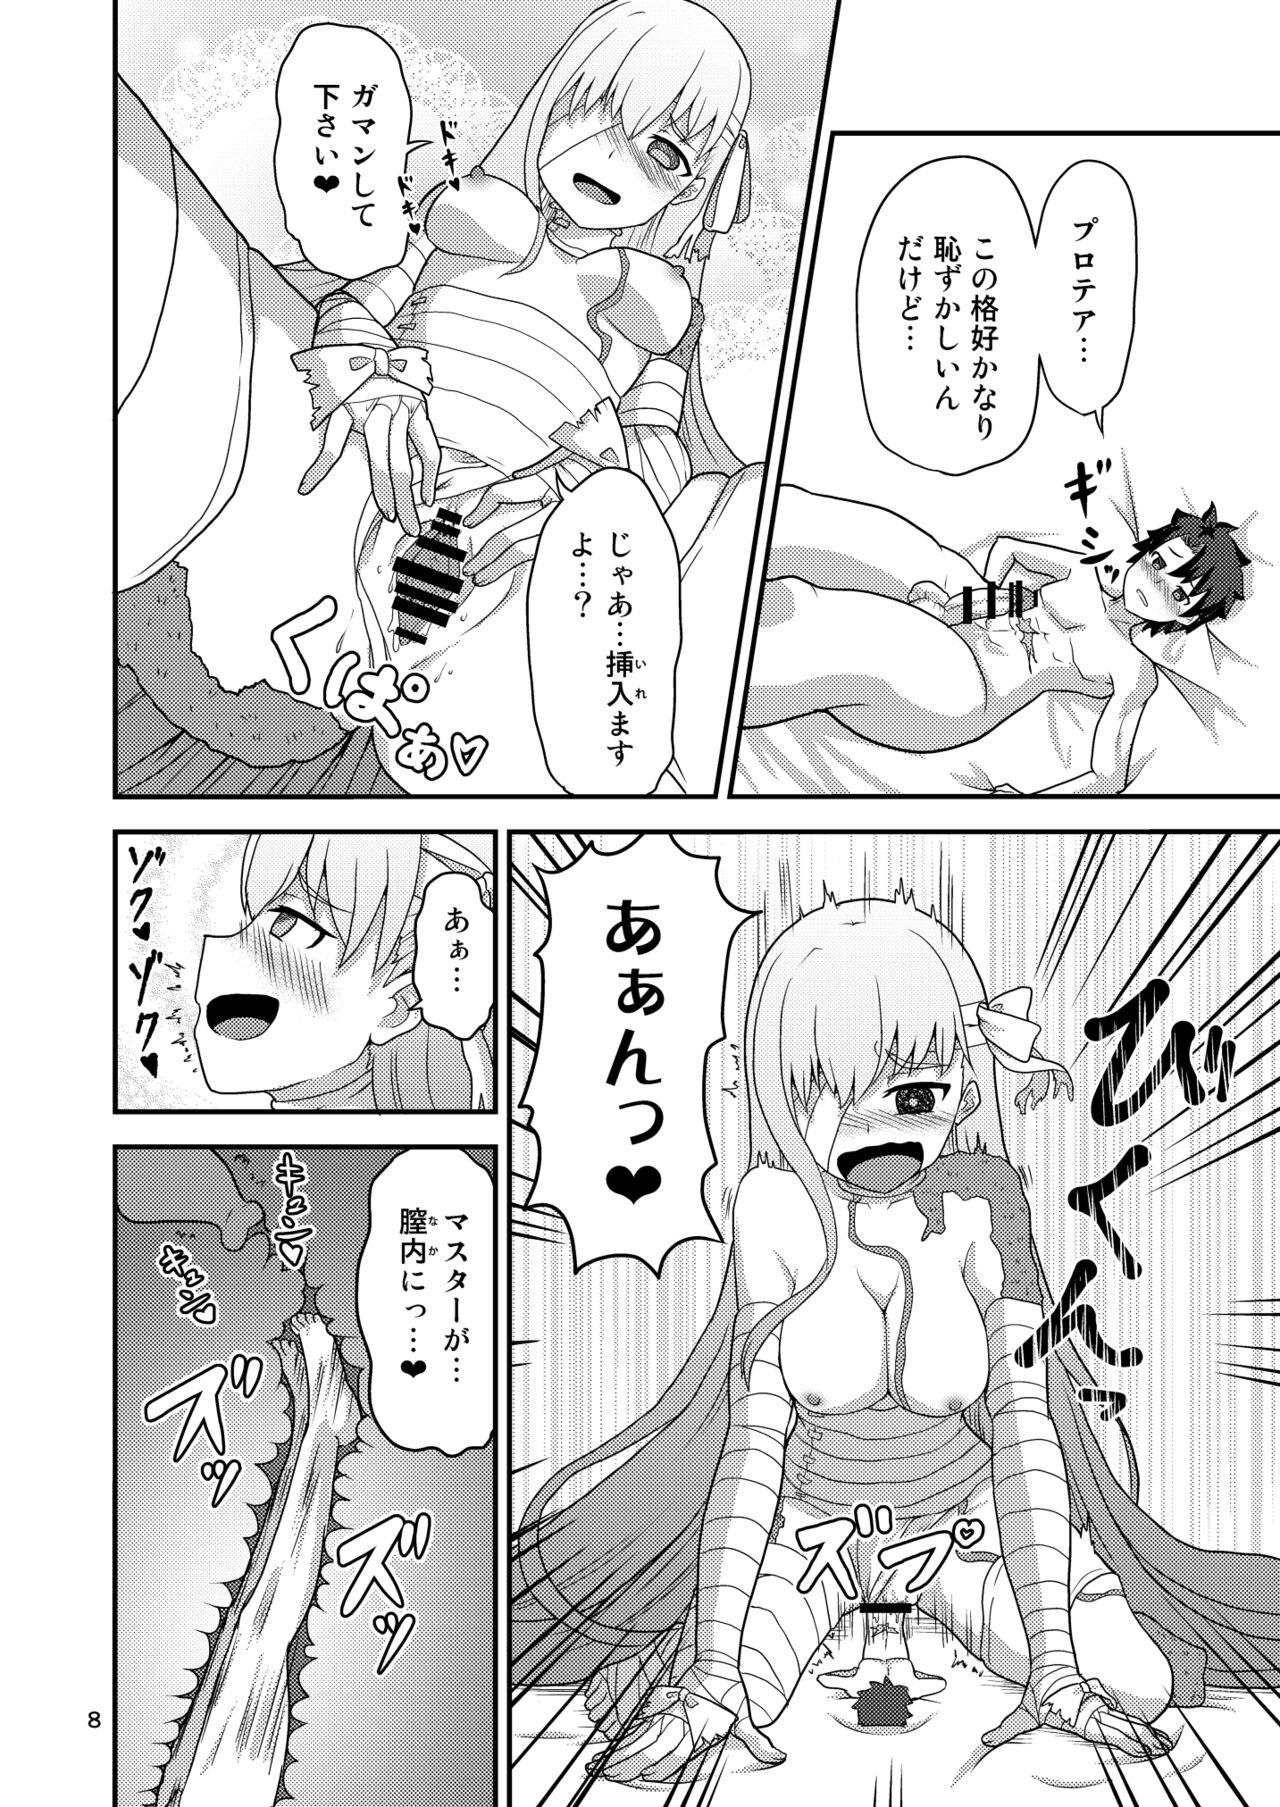 Ametuer Porn Hな私をゆるしてください - Fate grand order Toy - Page 9